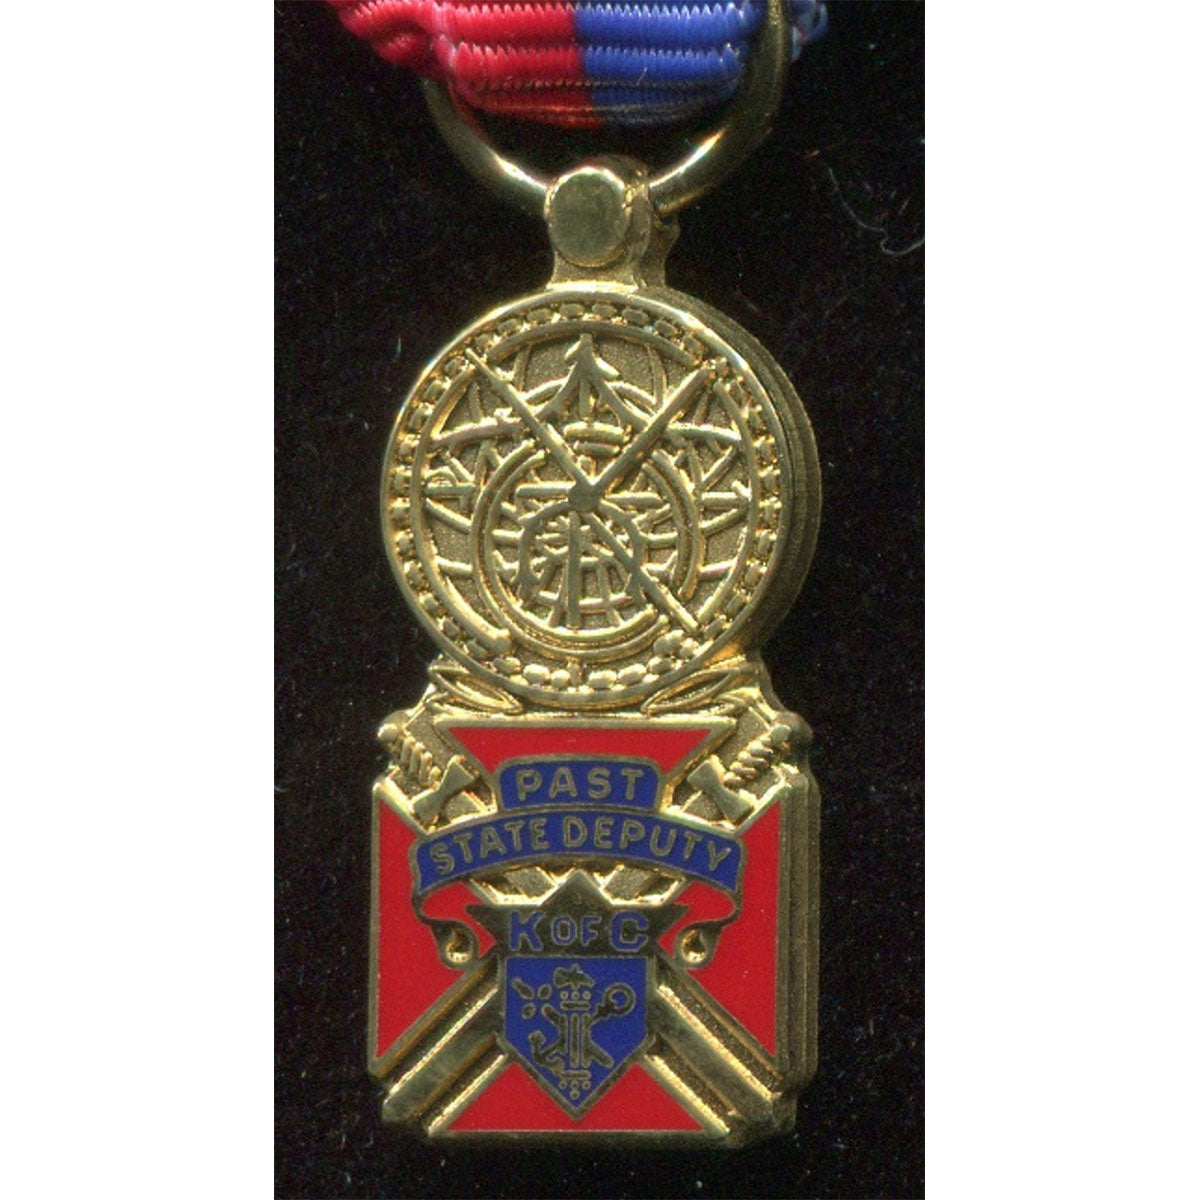 Past State Deputy Medal with Red/Blue Ribbon